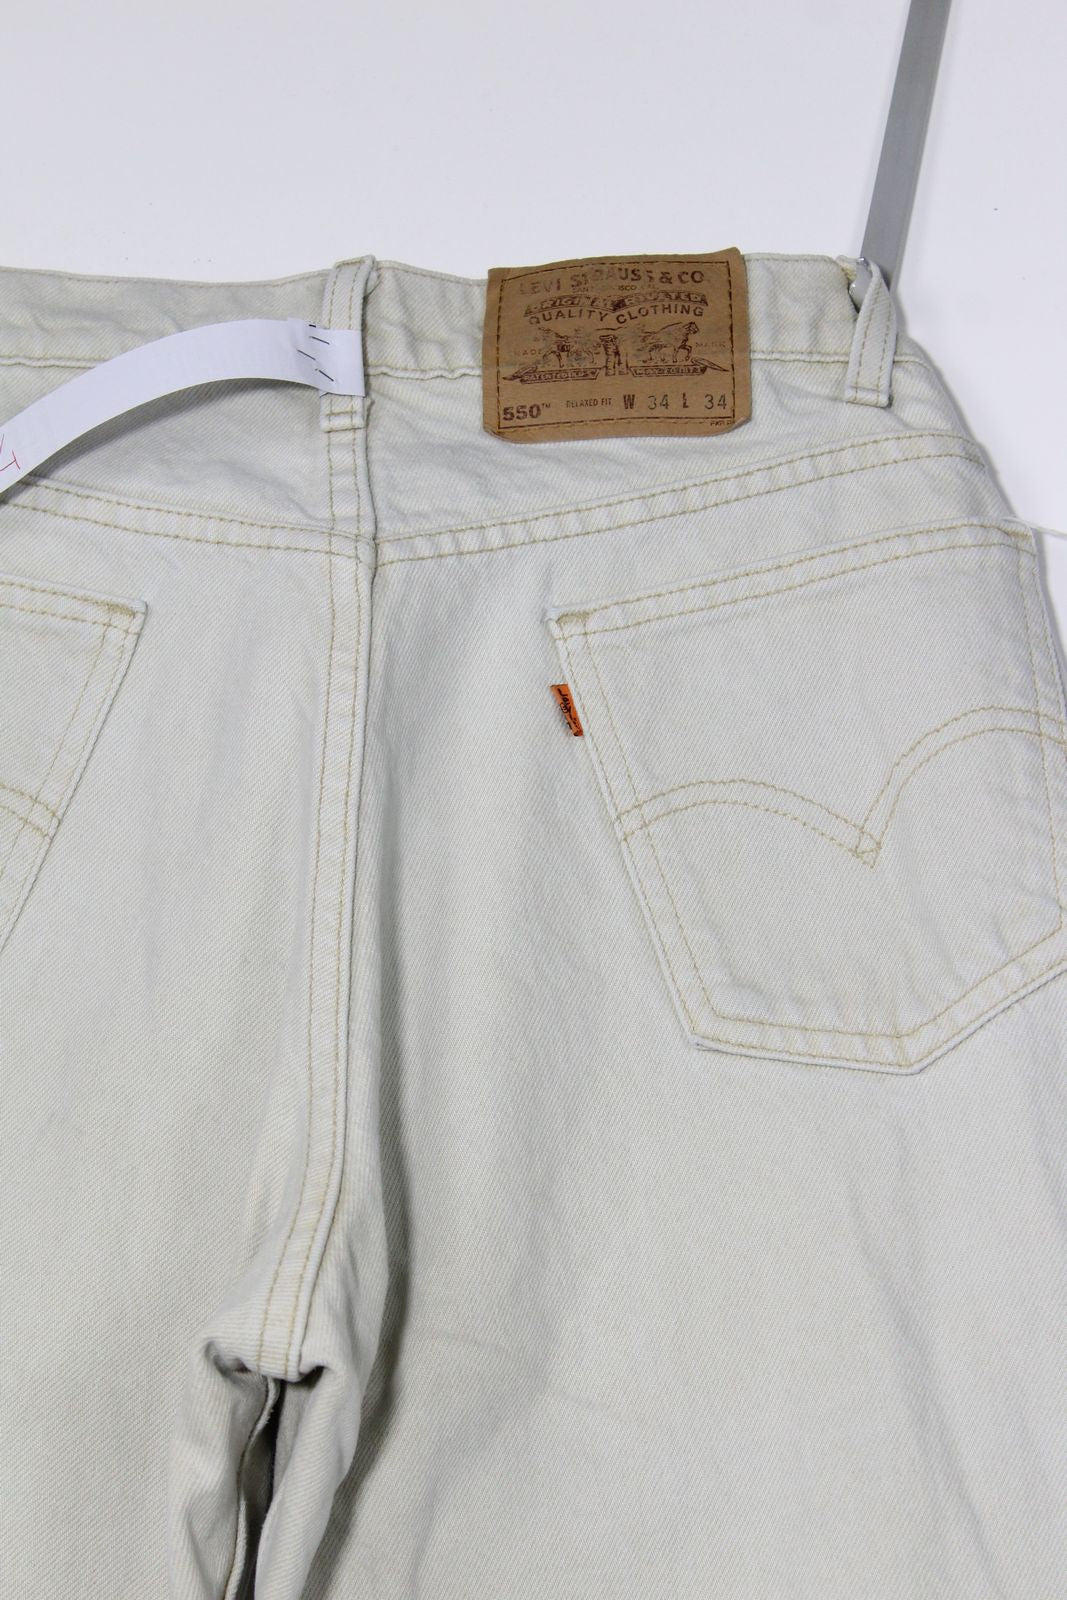 Levi's 550 Relaxed Fit Orange tab Made In USA W34 L34 Jeans Vintage